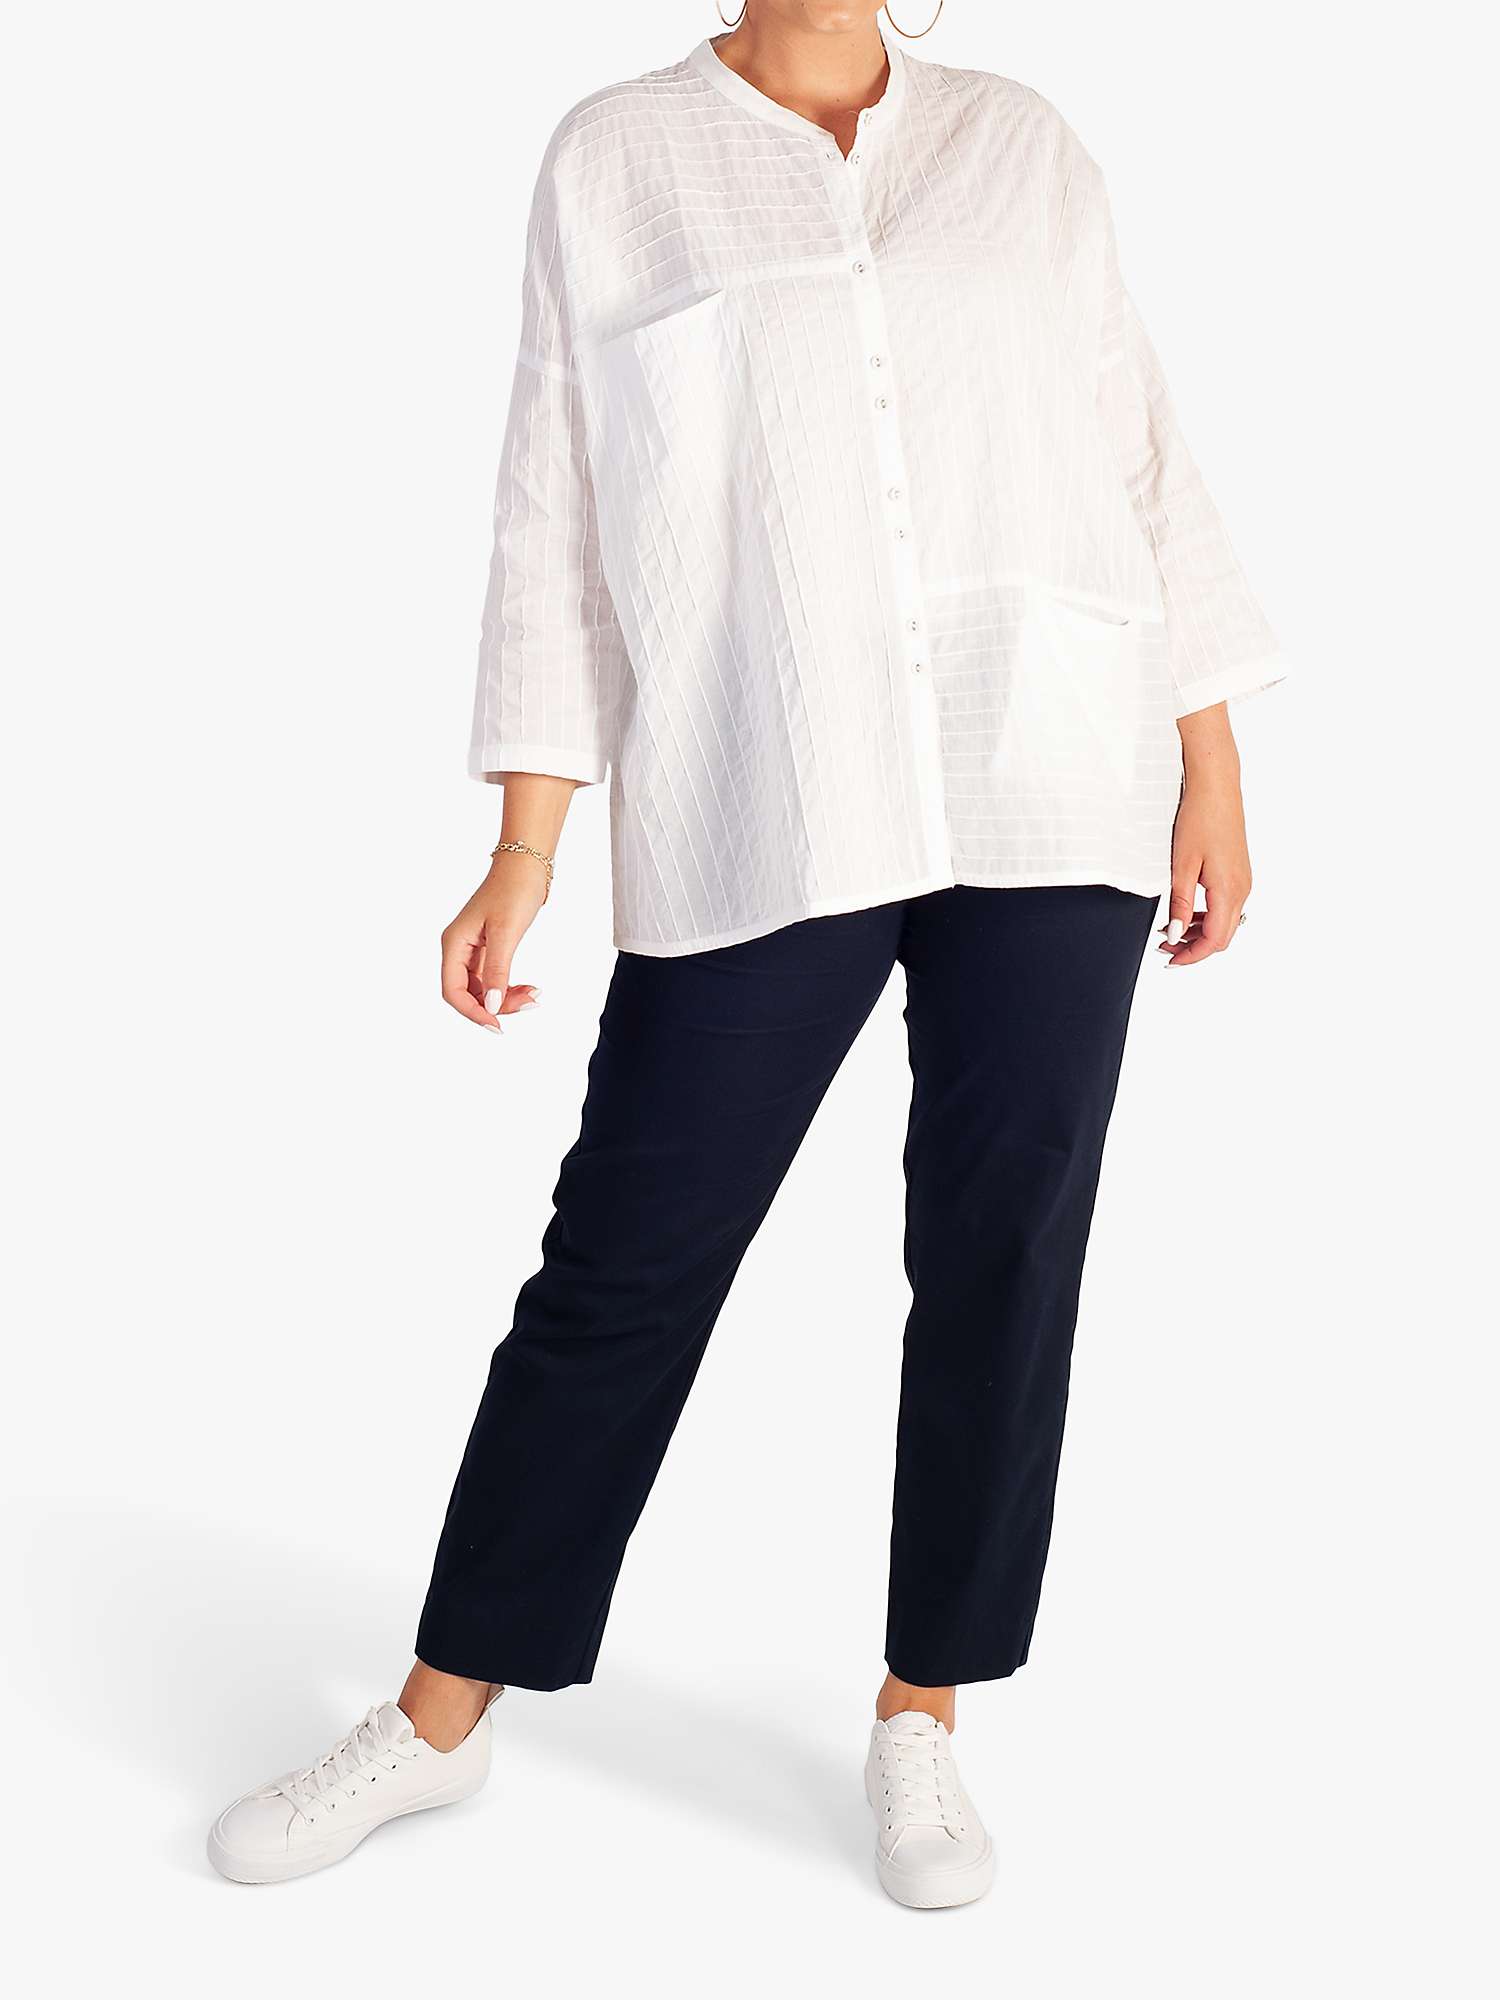 Buy chesca Collarless Textured Shirt Online at johnlewis.com